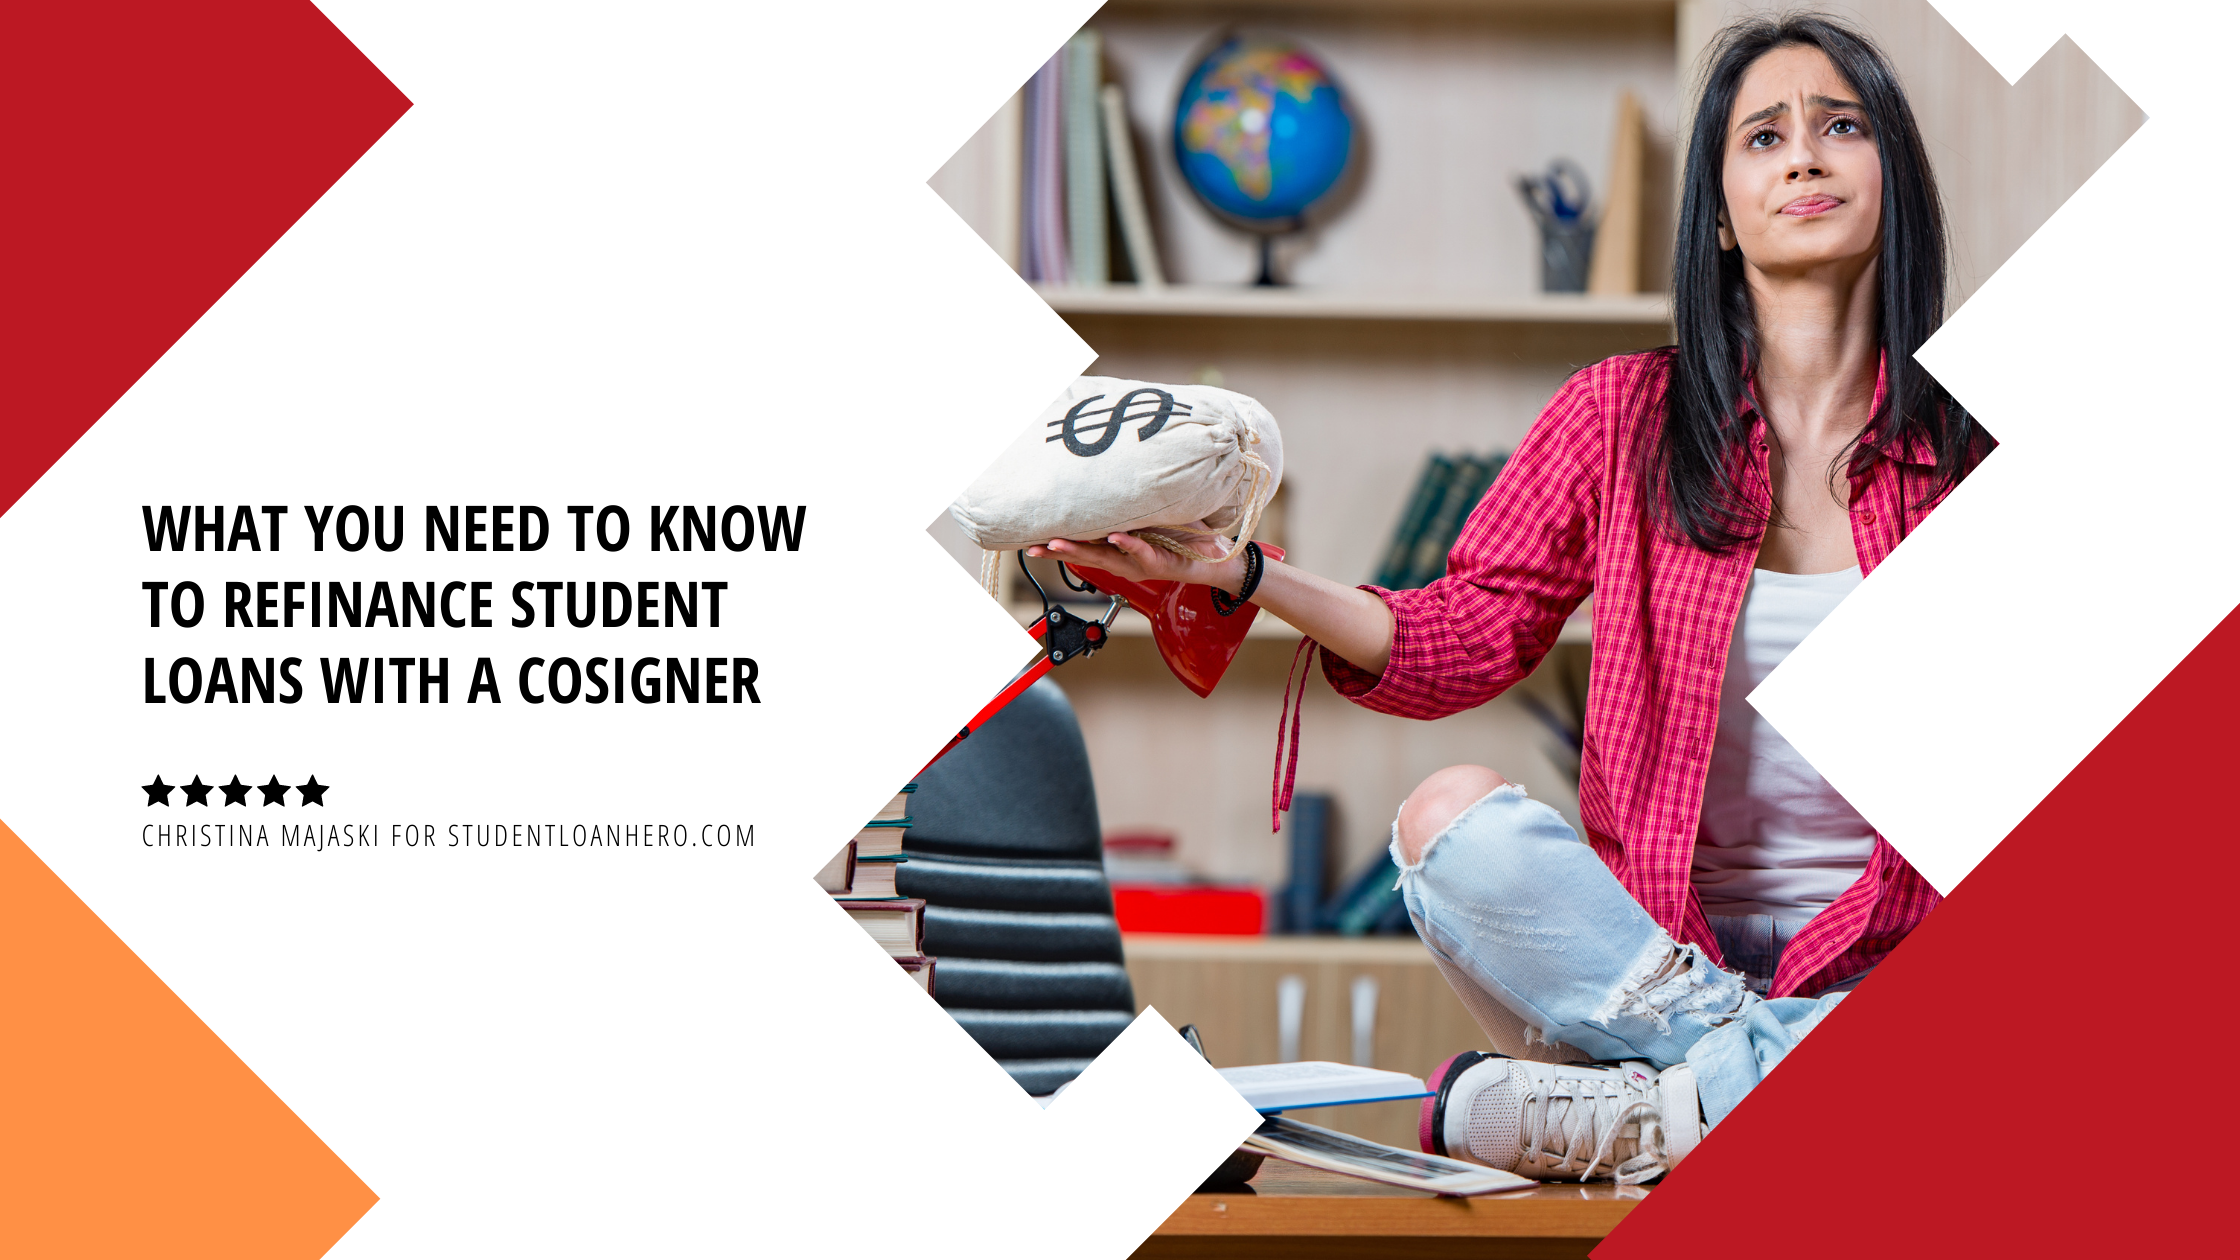 What You Need to Know to Refinance Student Loans With a Cosigner